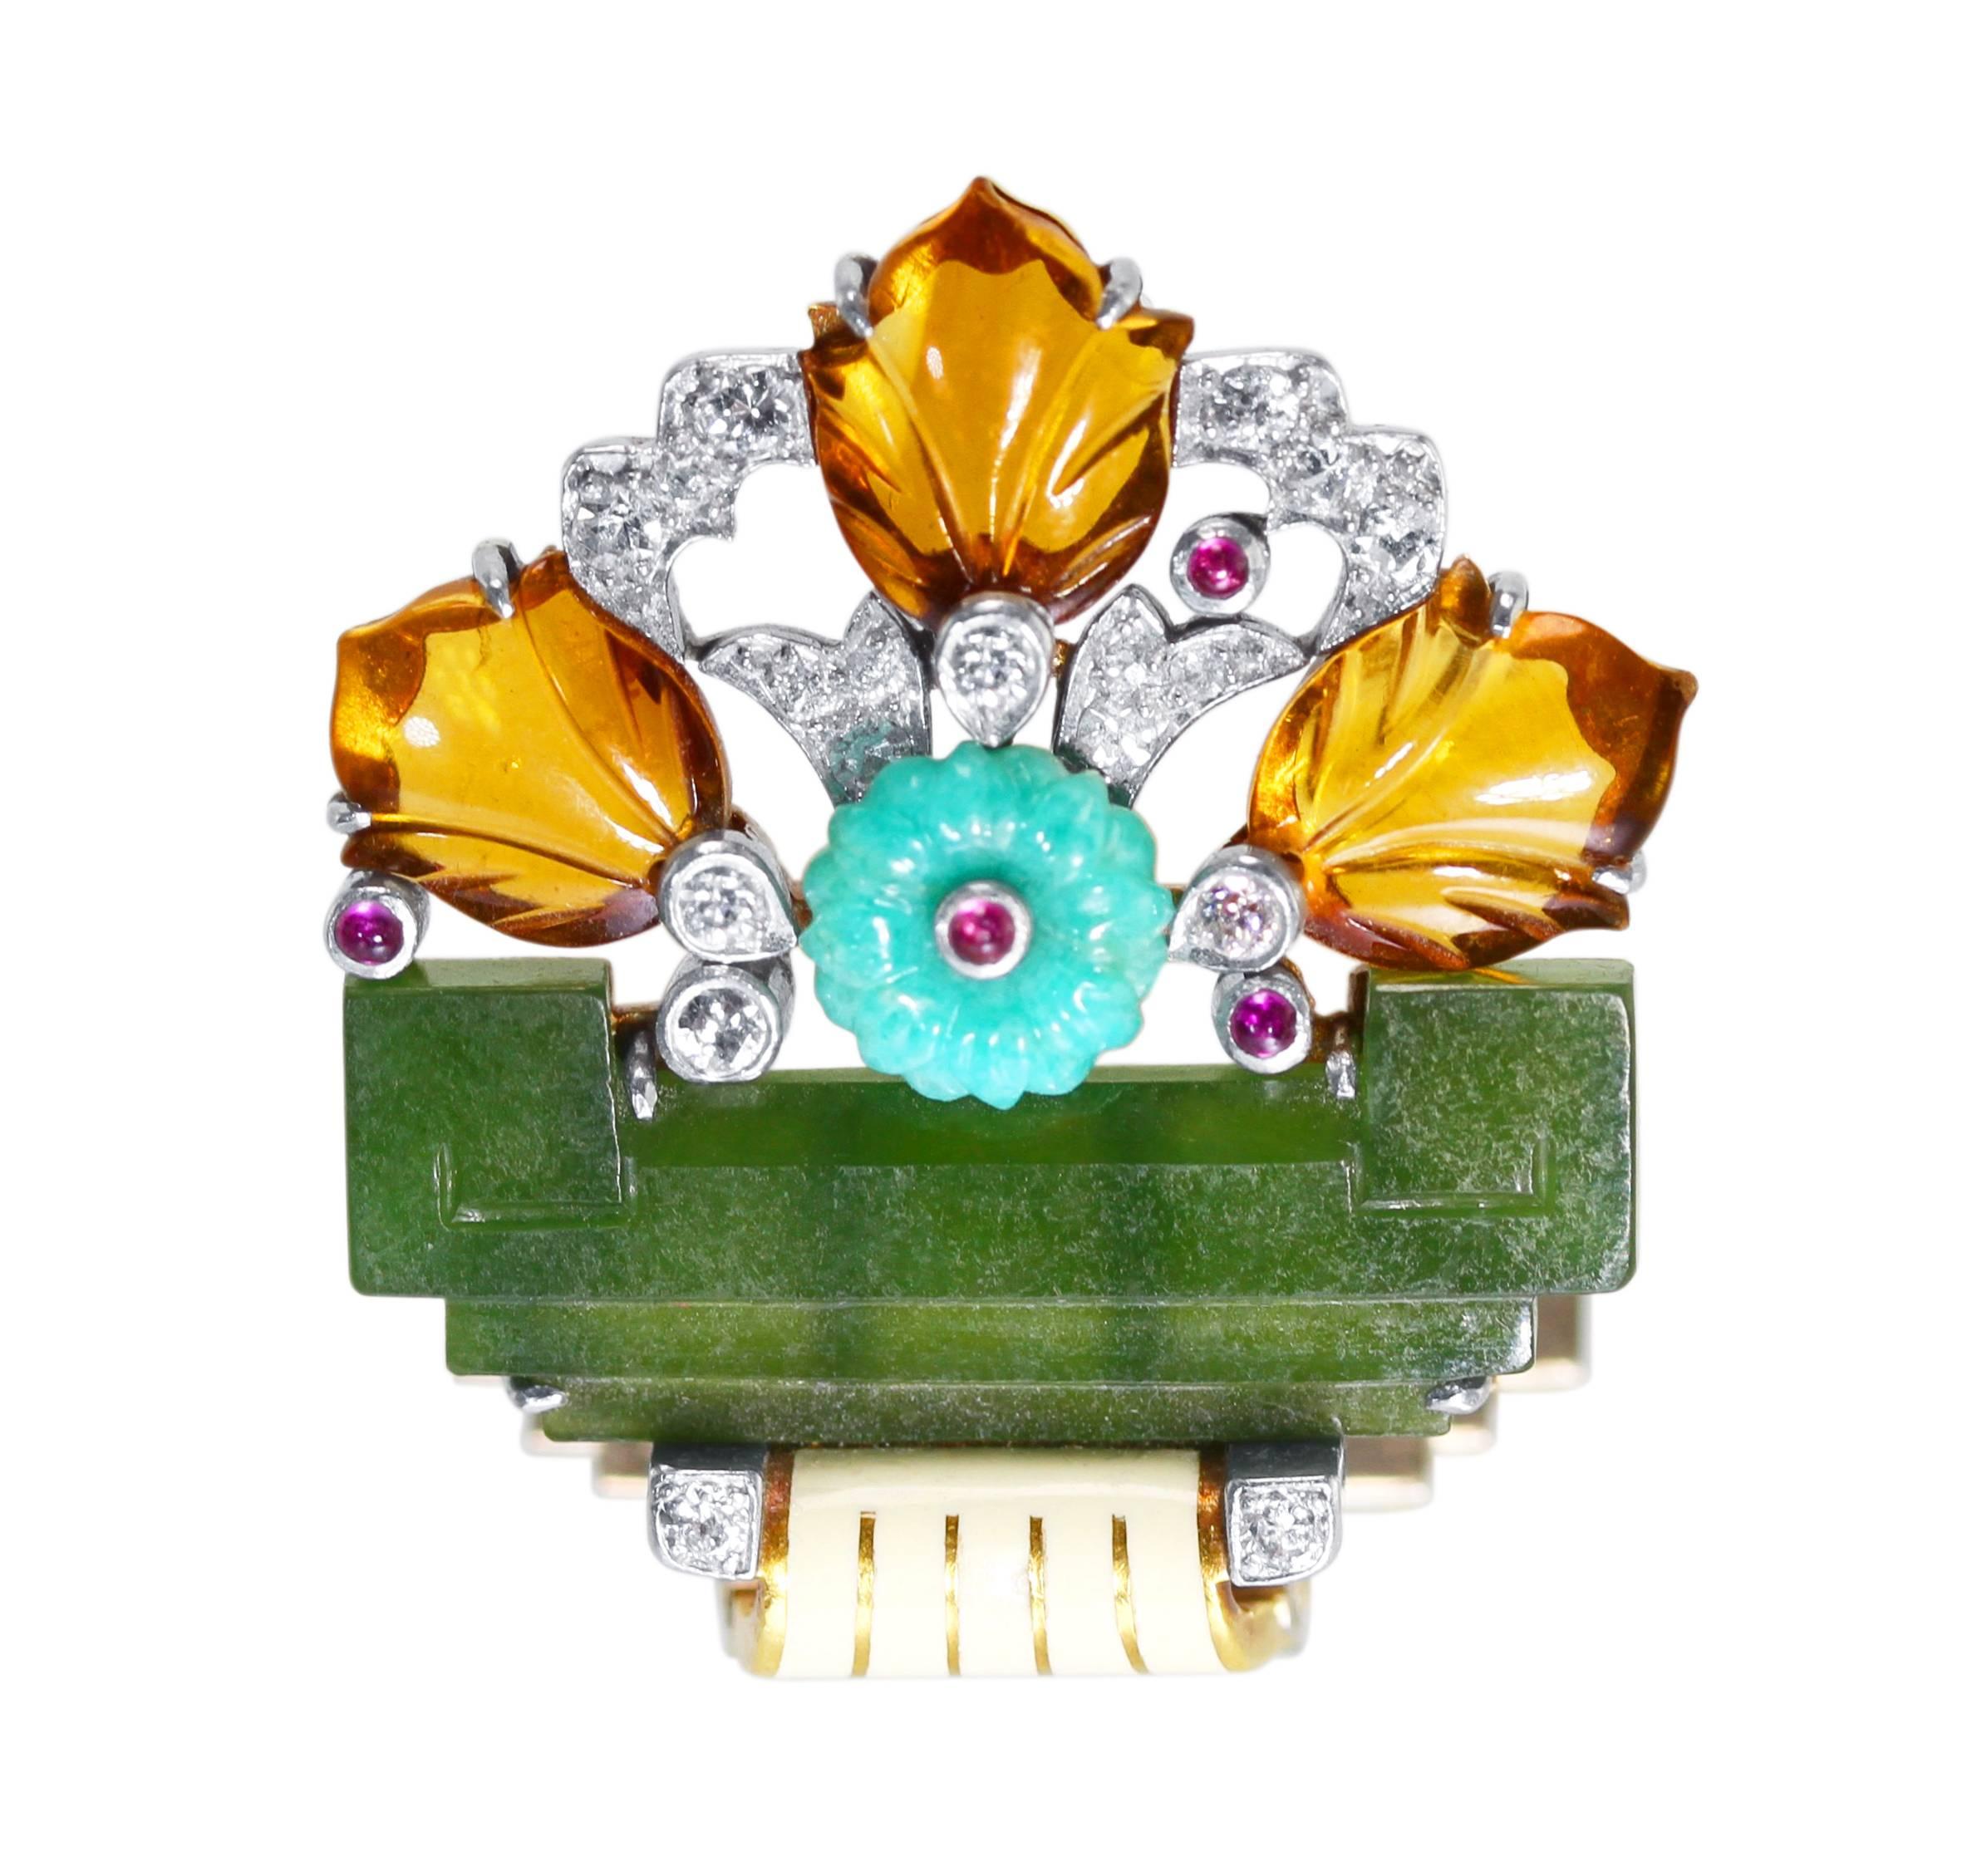 Art Deco 18 karat yellow gold, platinum, diamond, ruby, citrine, nephrite, amazonite and enamel clip brooch by Cartier
• Signed Cartier
• 10 single-cut and 8 old European-cut diamonds approximately 0.50 carat
• Carved Nephrite, citrine and